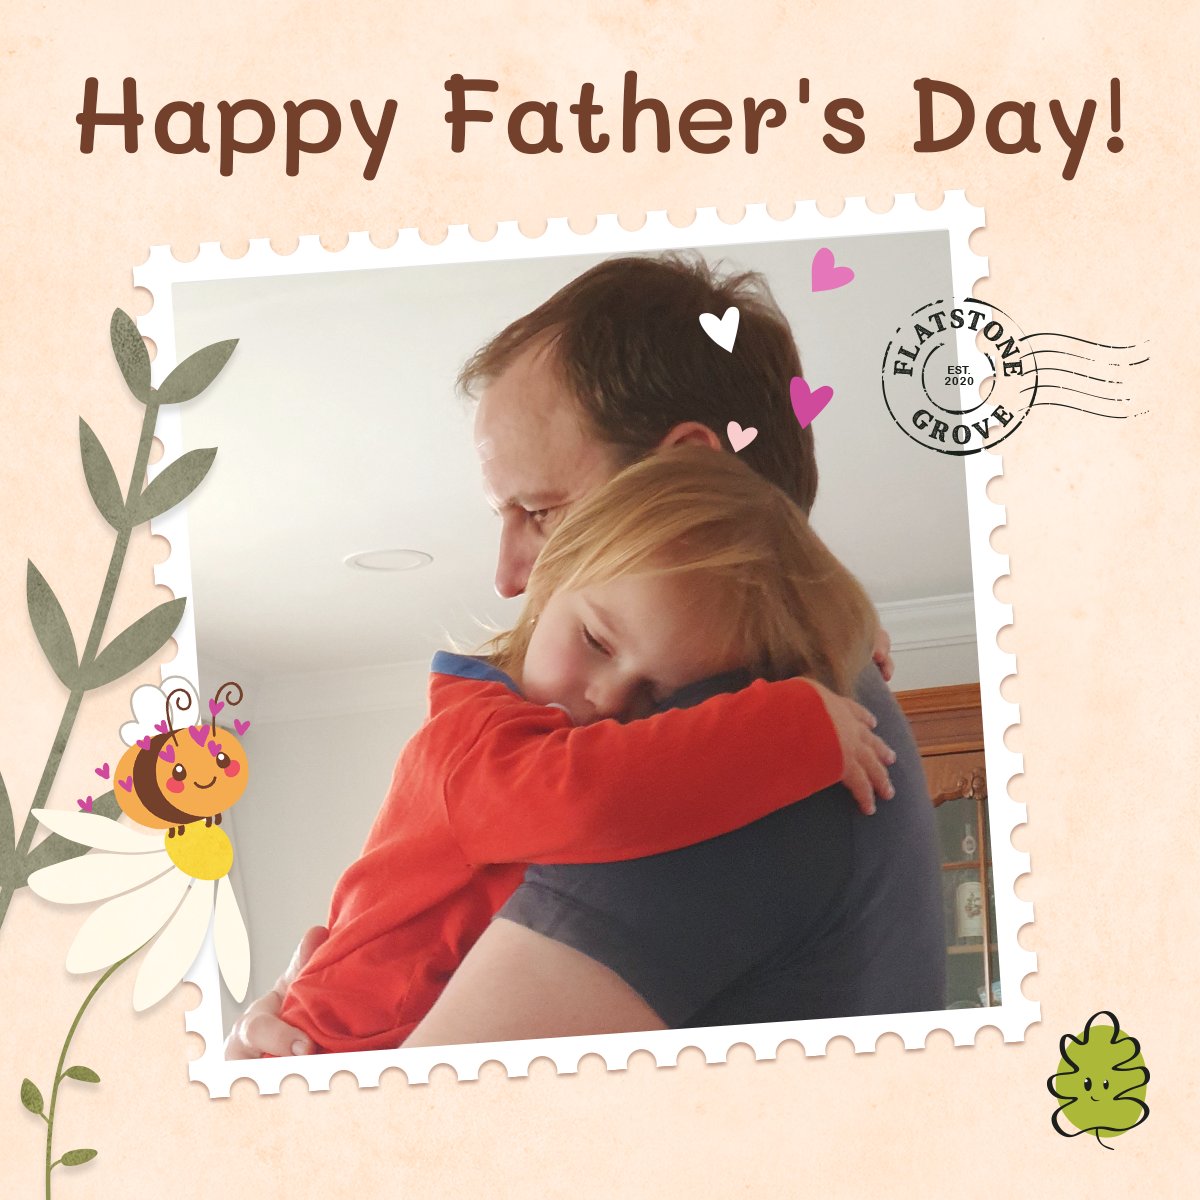 Happy Father's Day to all the fantastic dads out there!

#fathersday #fathersday2023 #happyfathersday #papabear #bestdadever #superdad #familyman #dadjokes #fatherandson #fatheranddaughter #fsg #bedtimestory #celebration #today